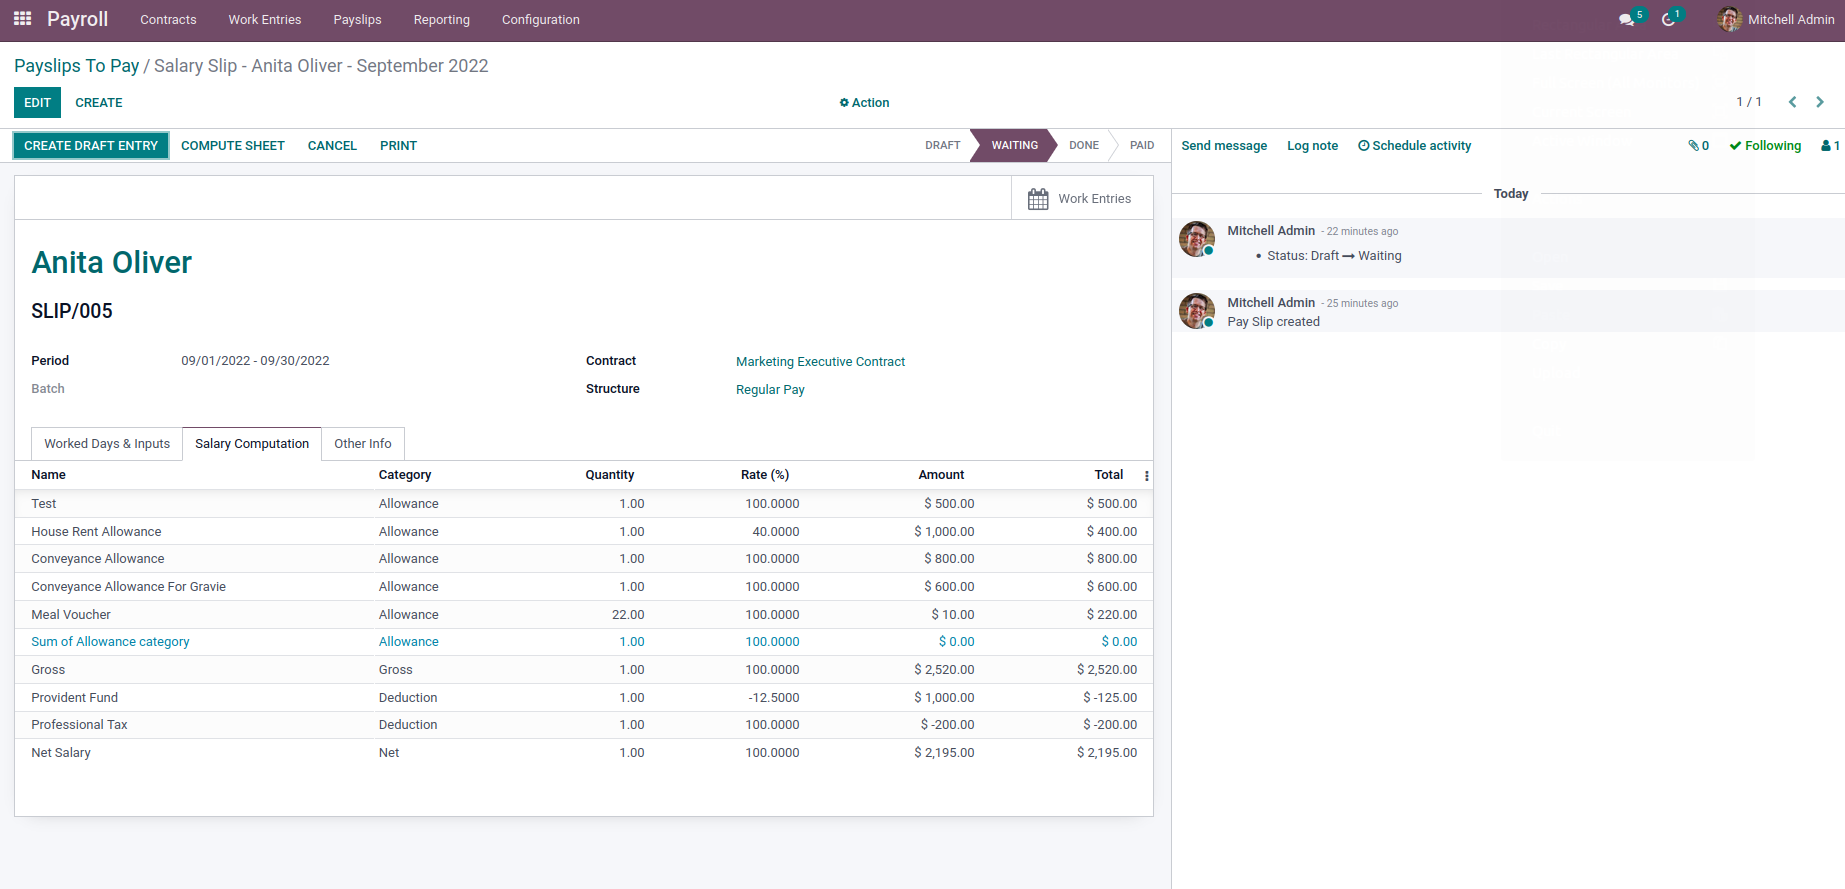 how-to-create-configure-salary-rules-in-odoo-15-payroll-cybrosys